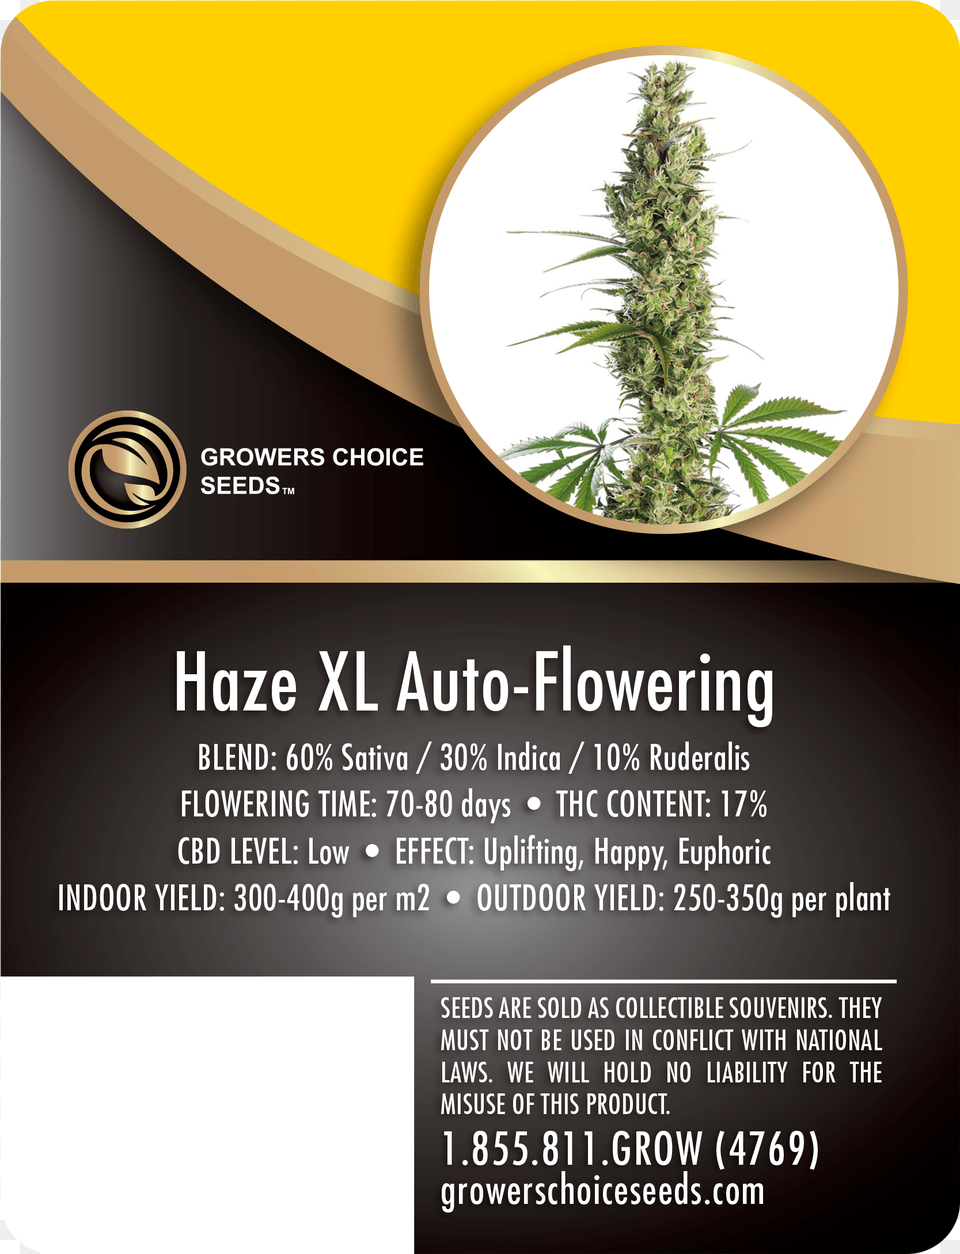 Haze Xl Auto Flowering Feminized Cannabis Seeds Growers Choice Gorilla Glue, Advertisement, Poster, Plant, Herbal Png Image